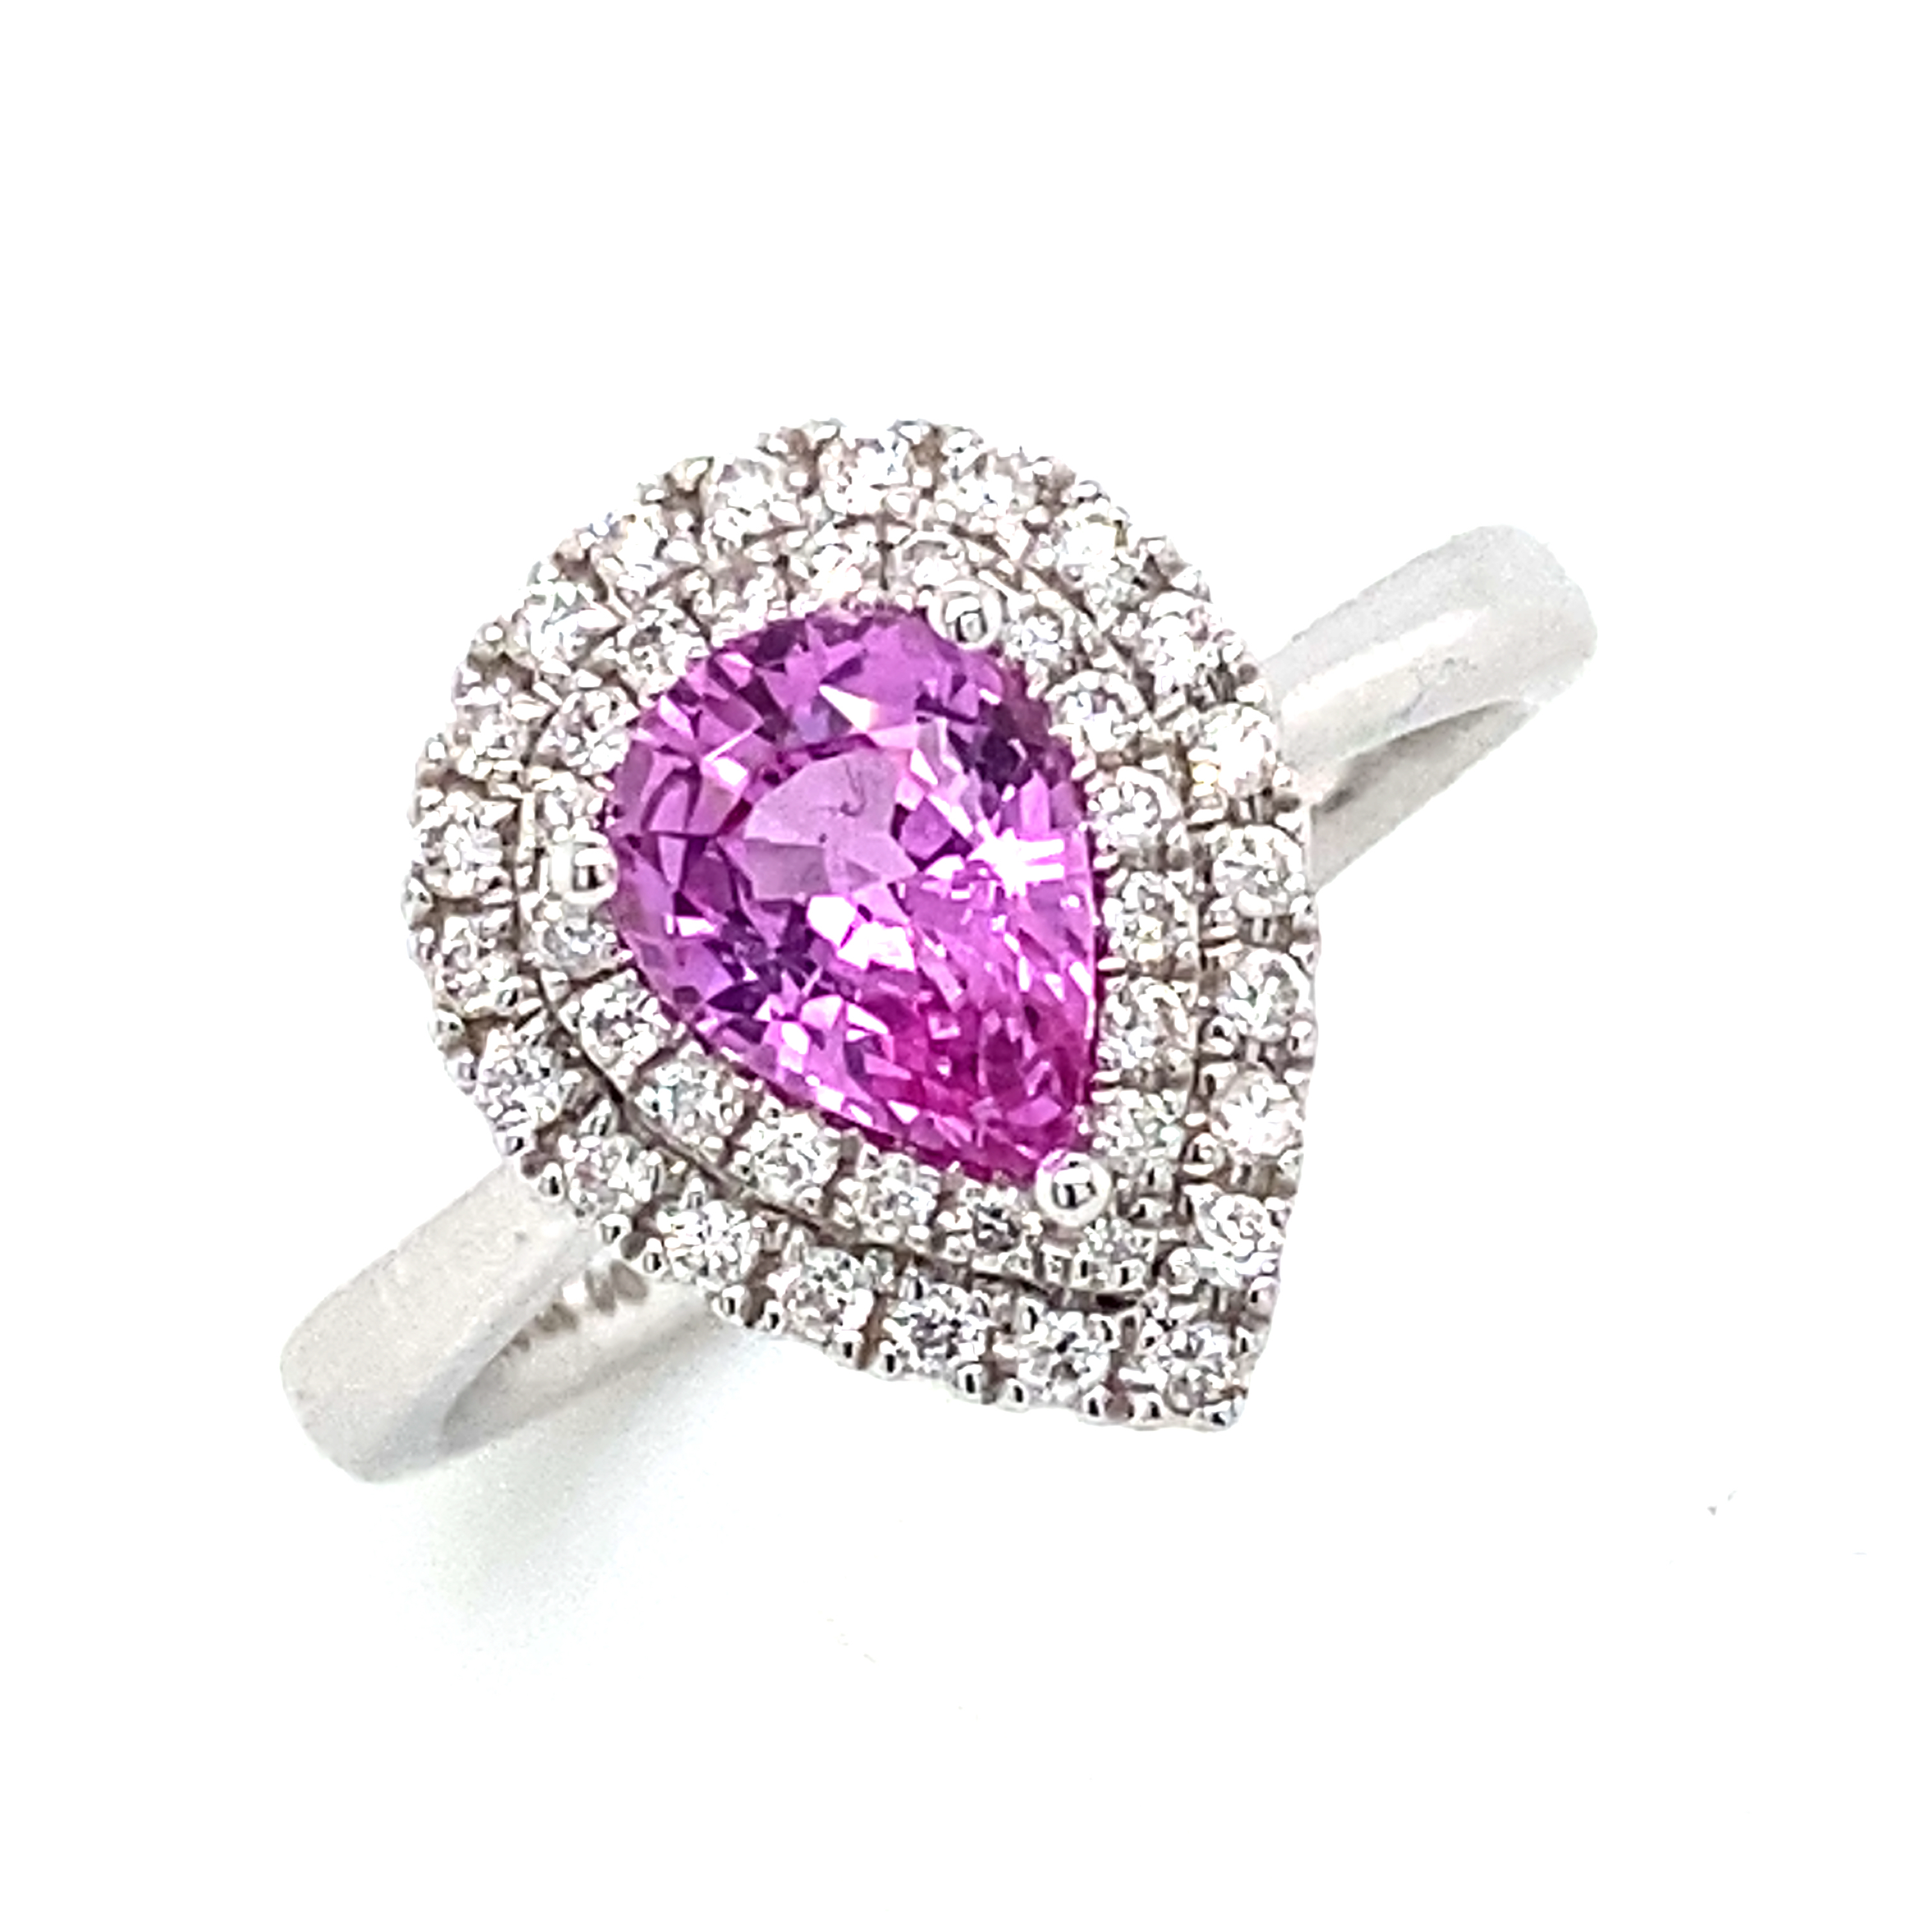 18 Carat White Gold Diamond and Pink Sapphire Halo  Ring